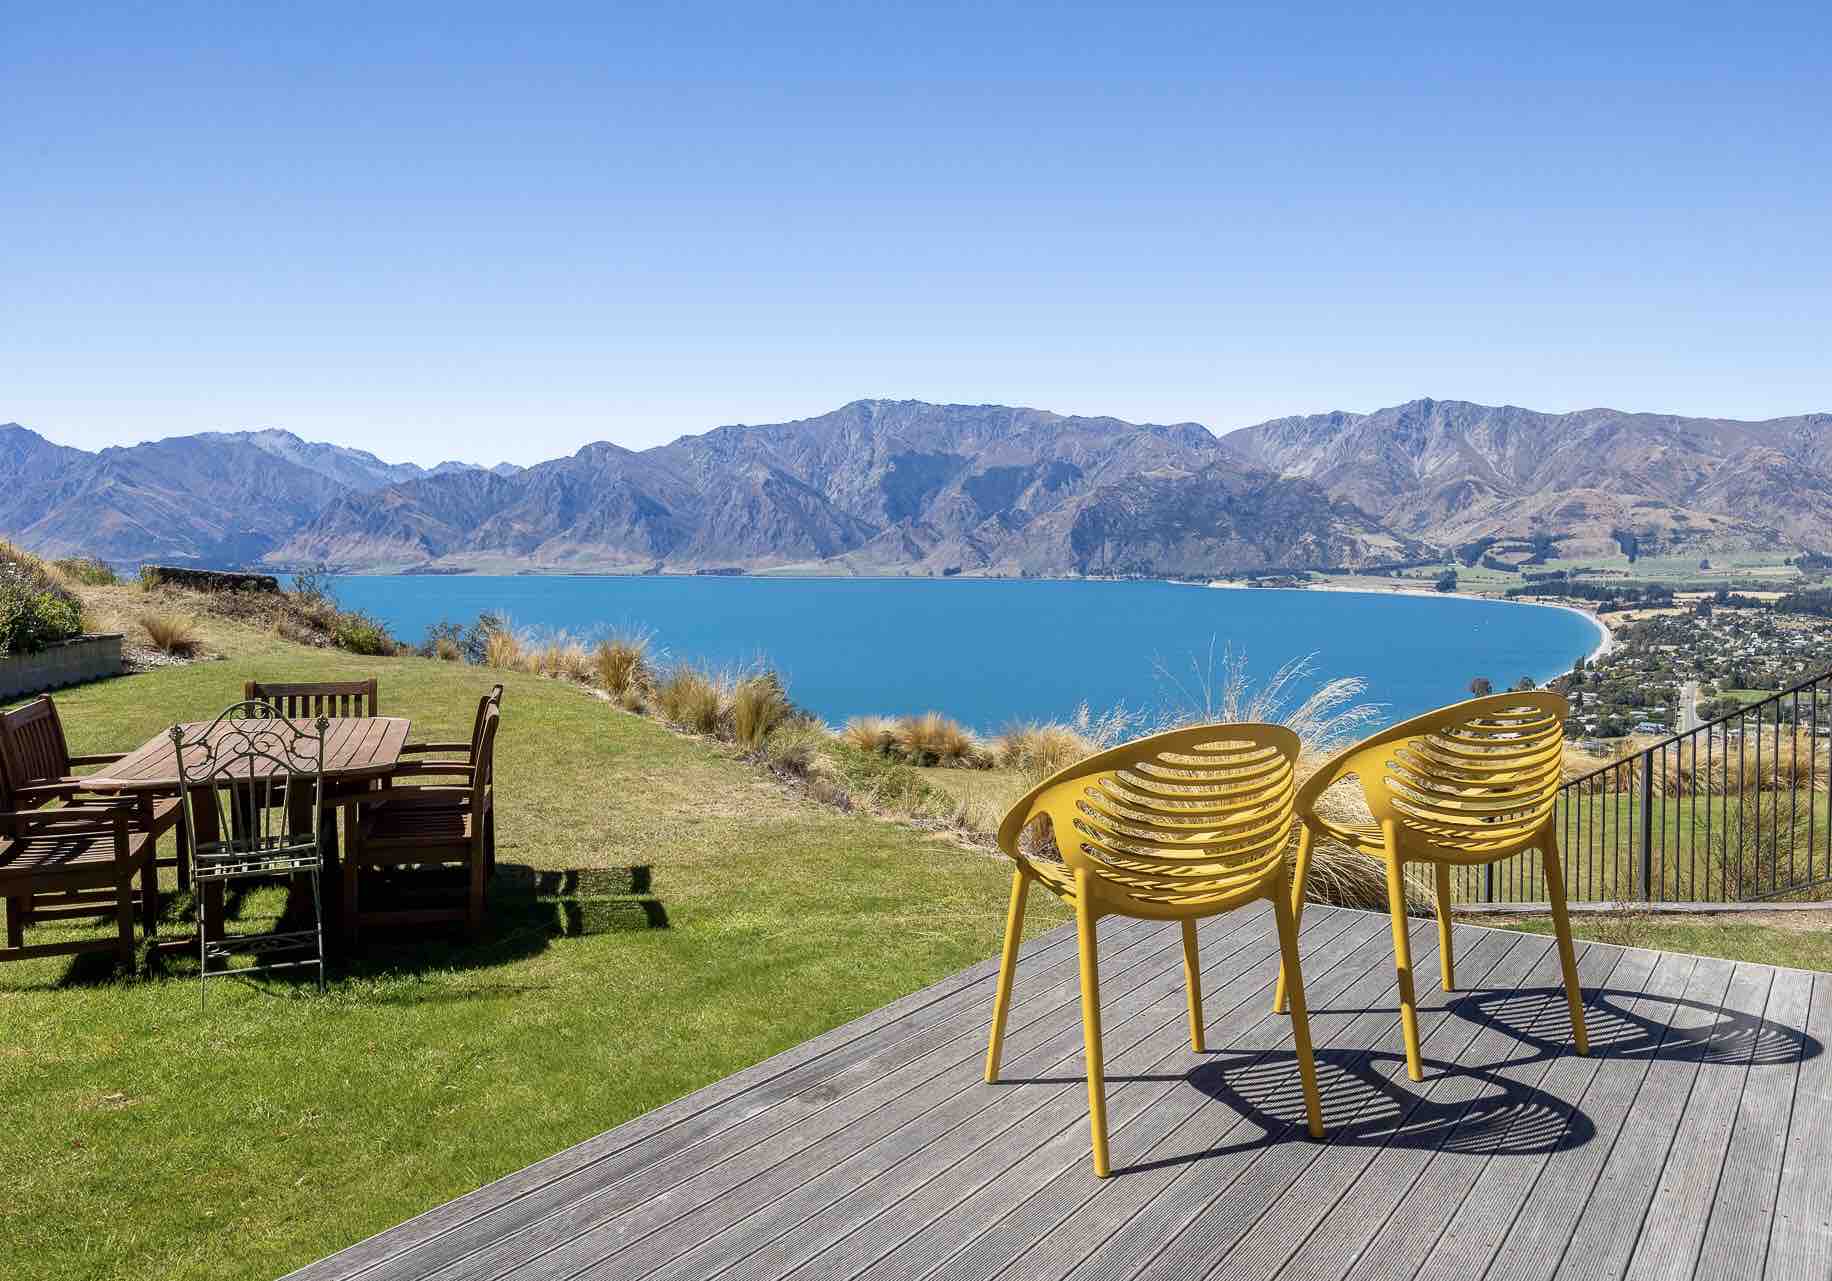 A patio and grass backyard overlooking a lake view with mountains